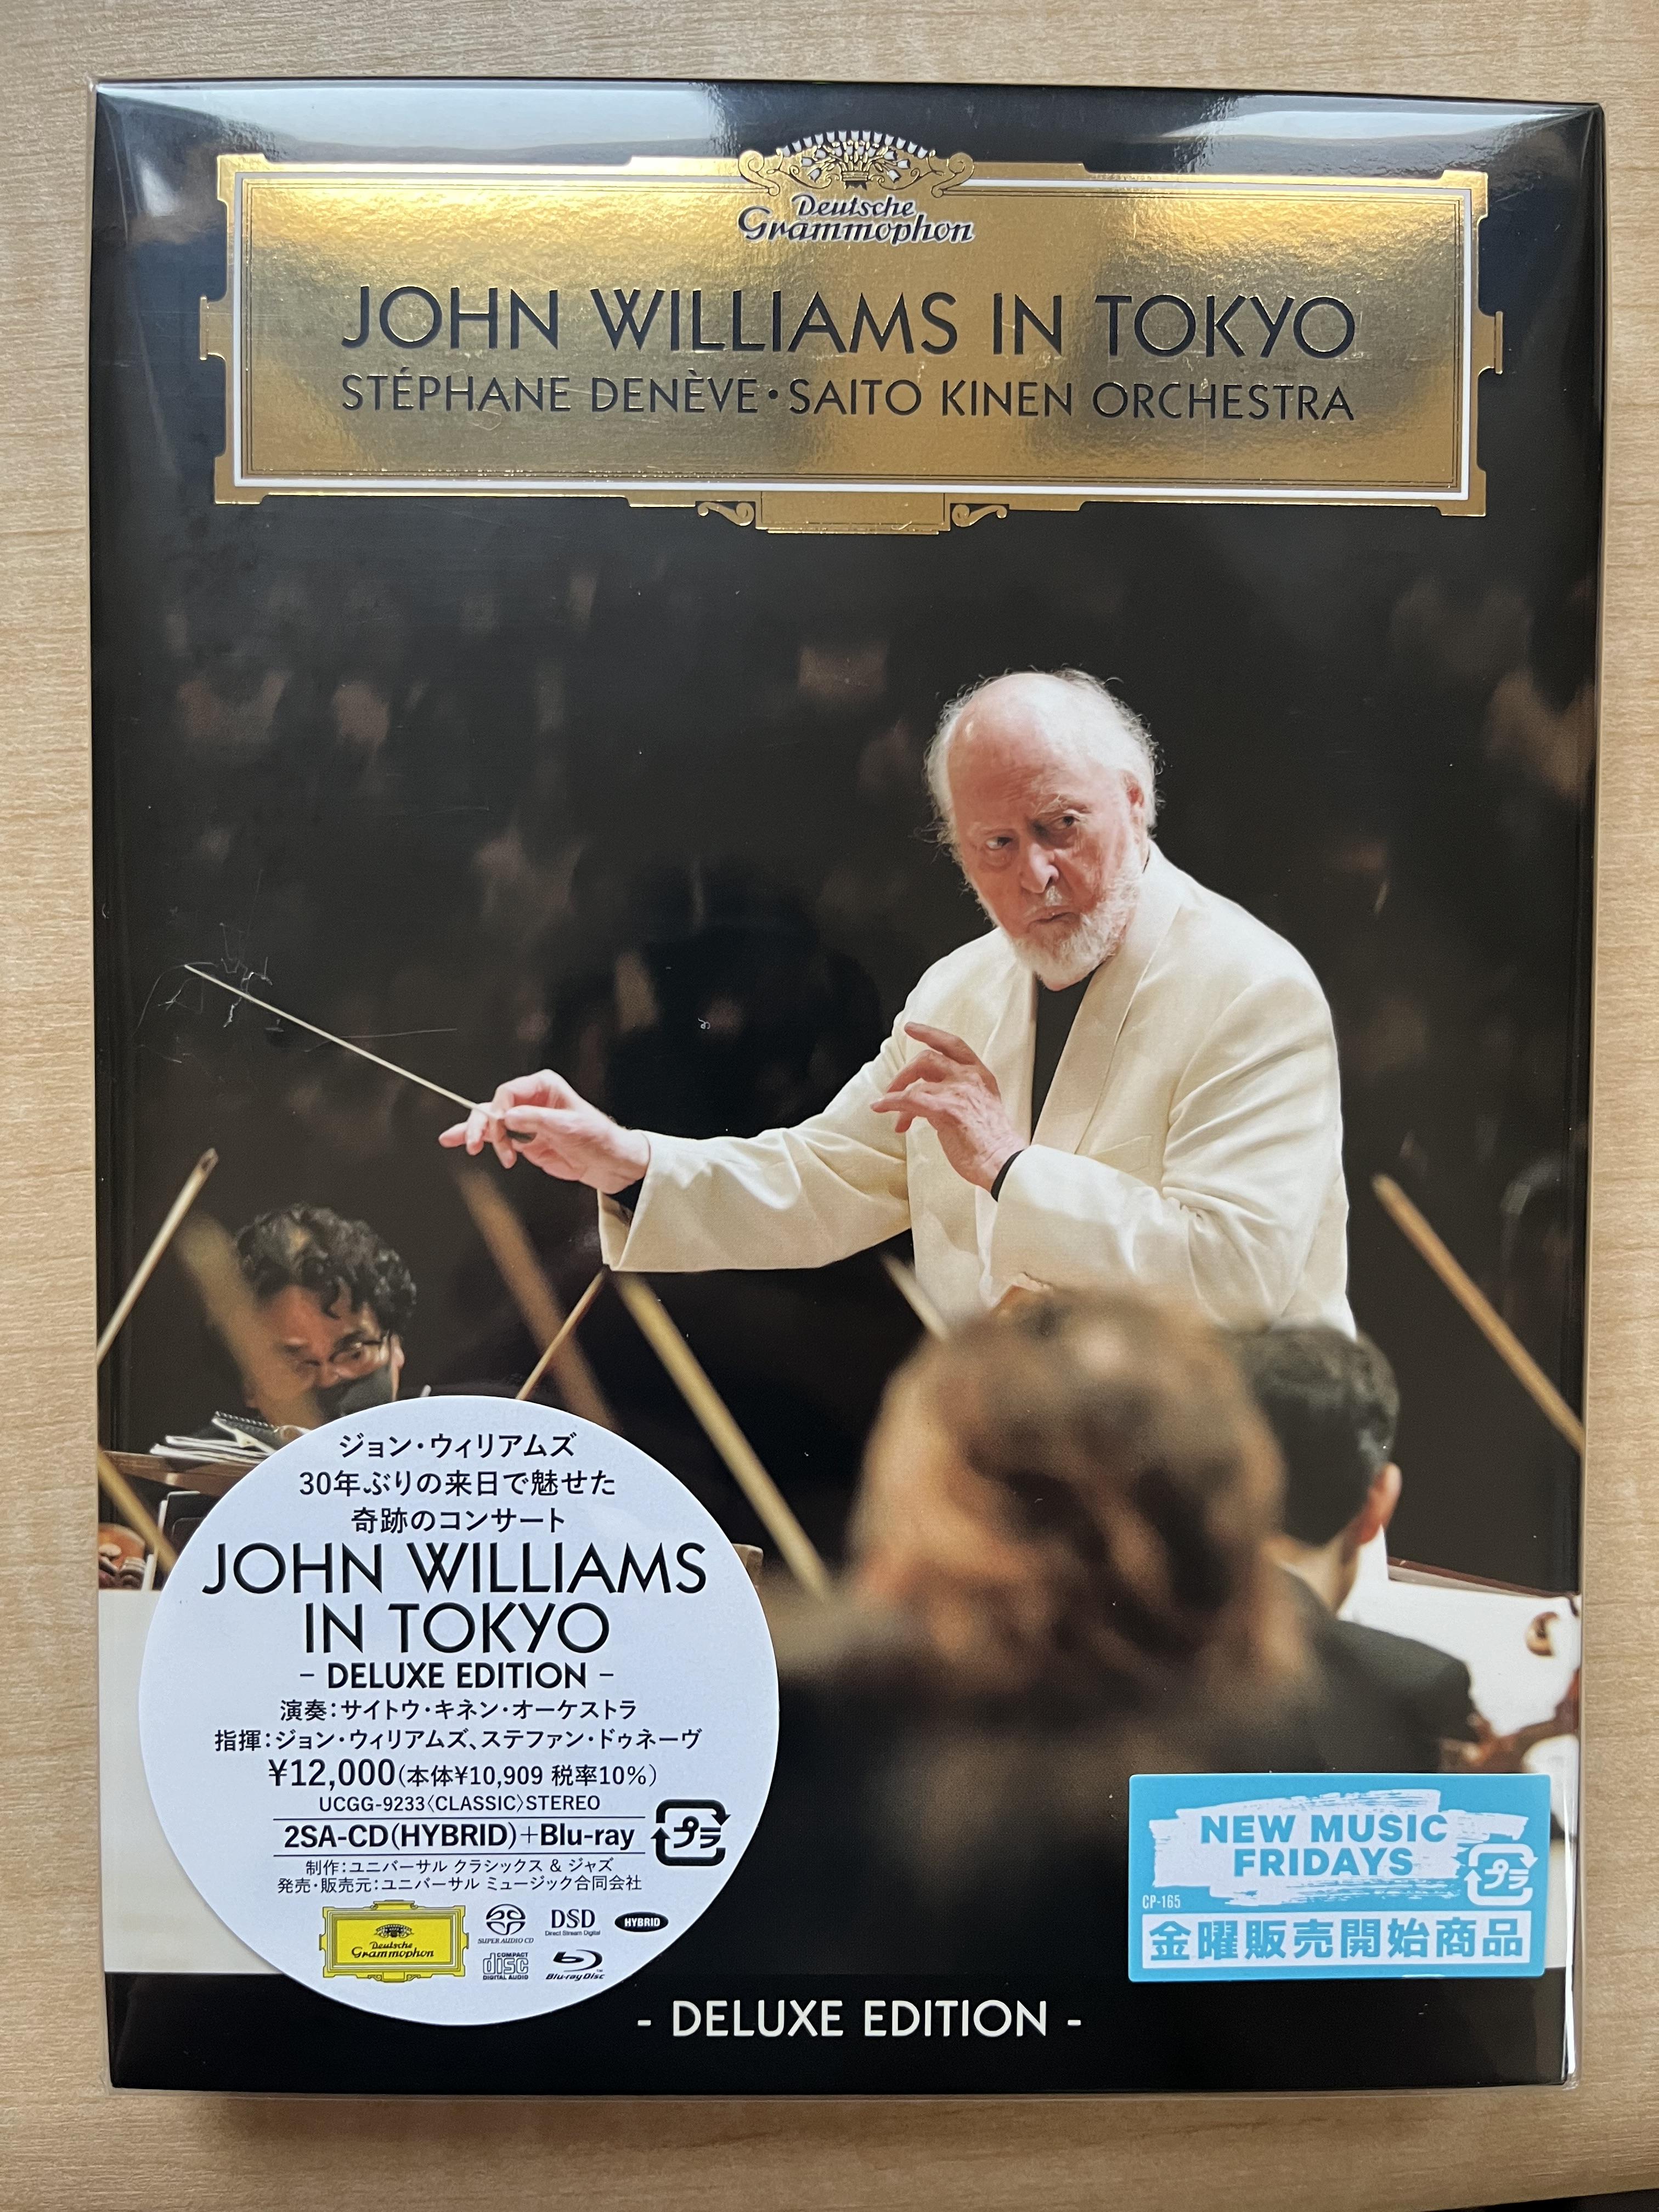 John Williams In Tokyo - New live concert album coming May 3rd 